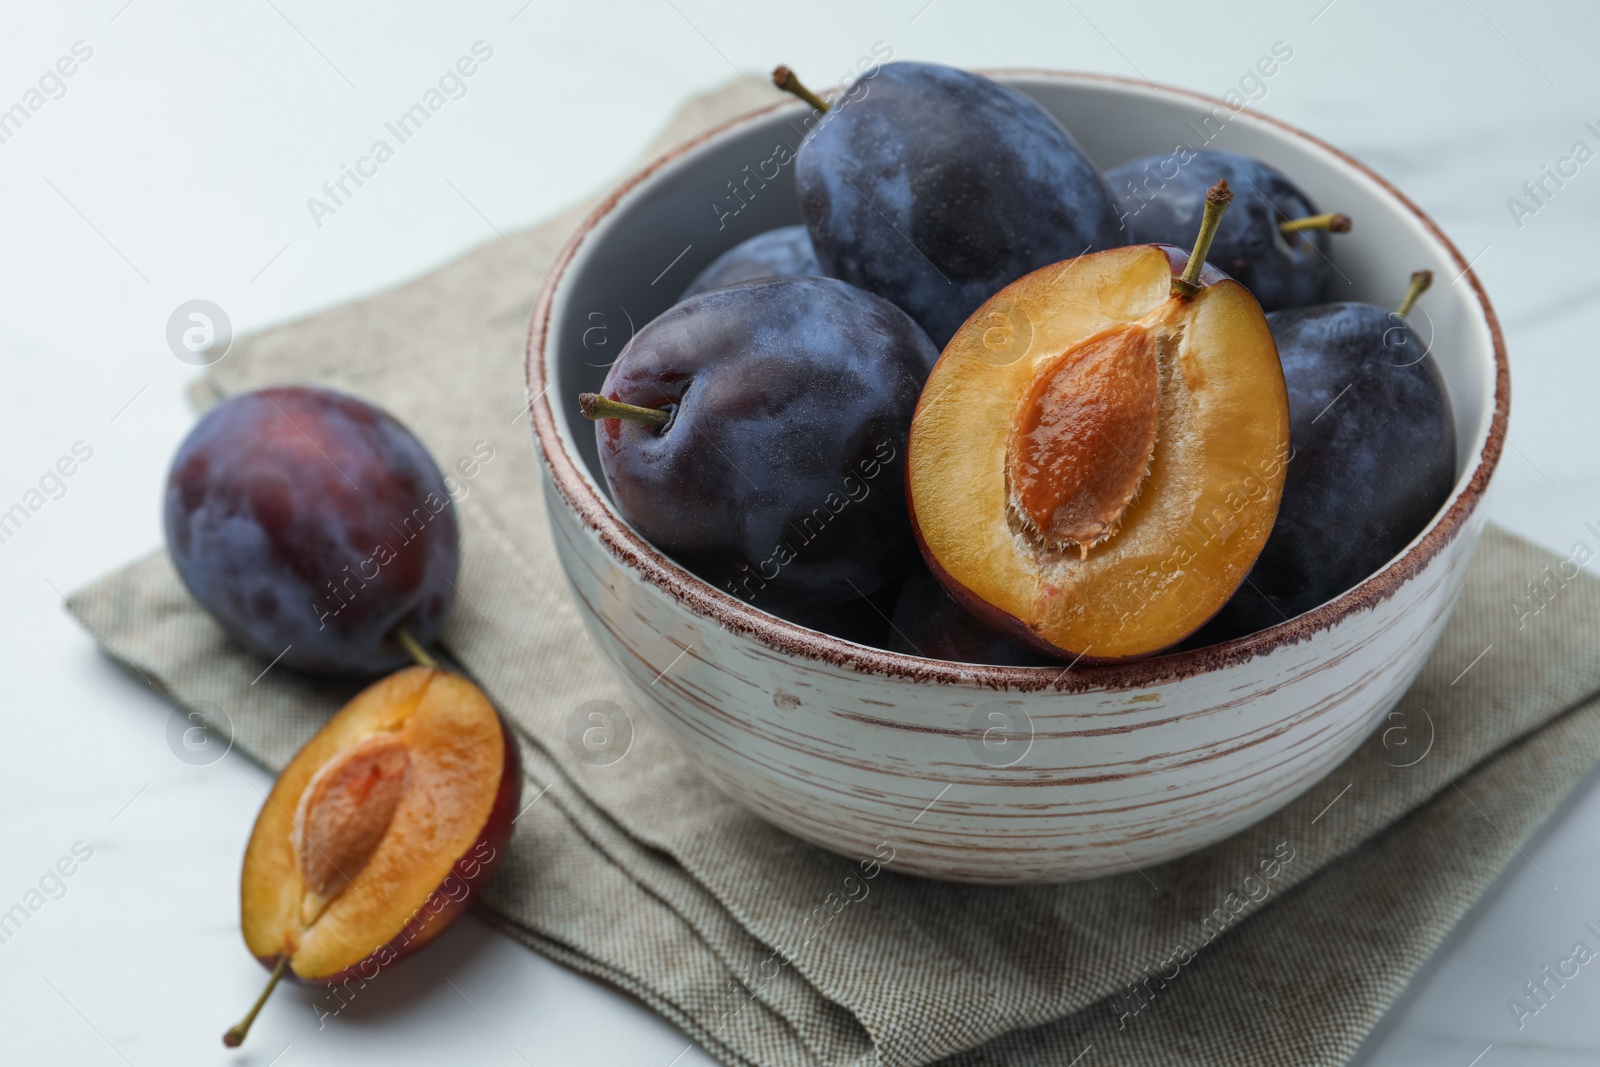 Photo of Tasty ripe plums on white table, closeup